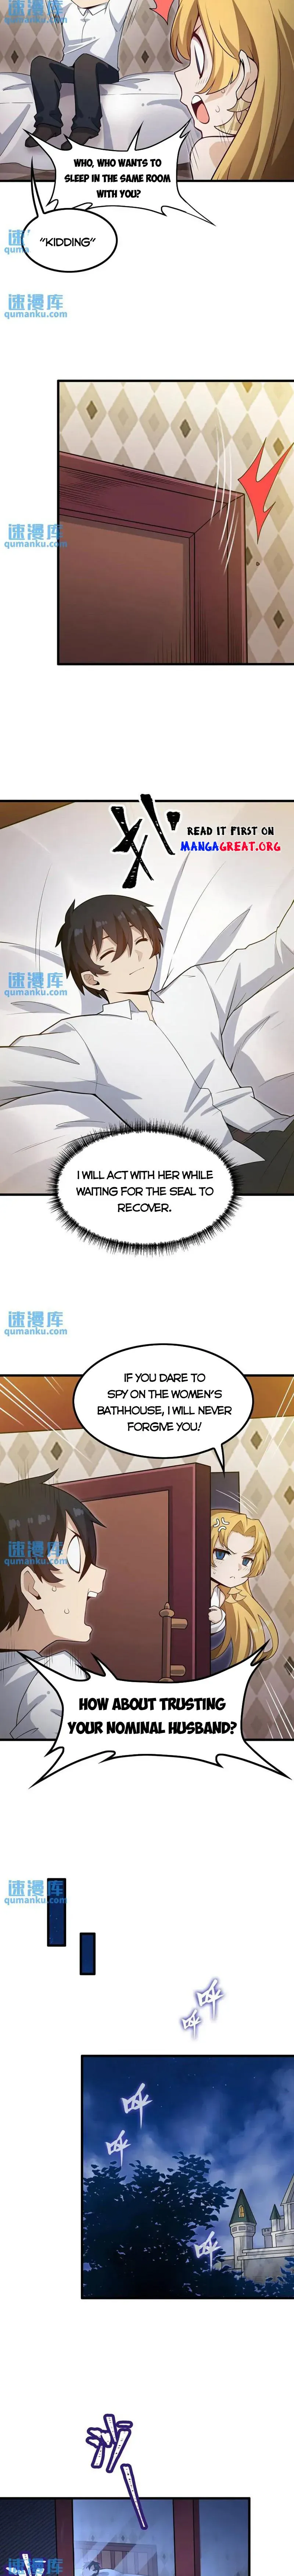 Infinite Apostles and Twelve War Girls Chapter 374 page 5